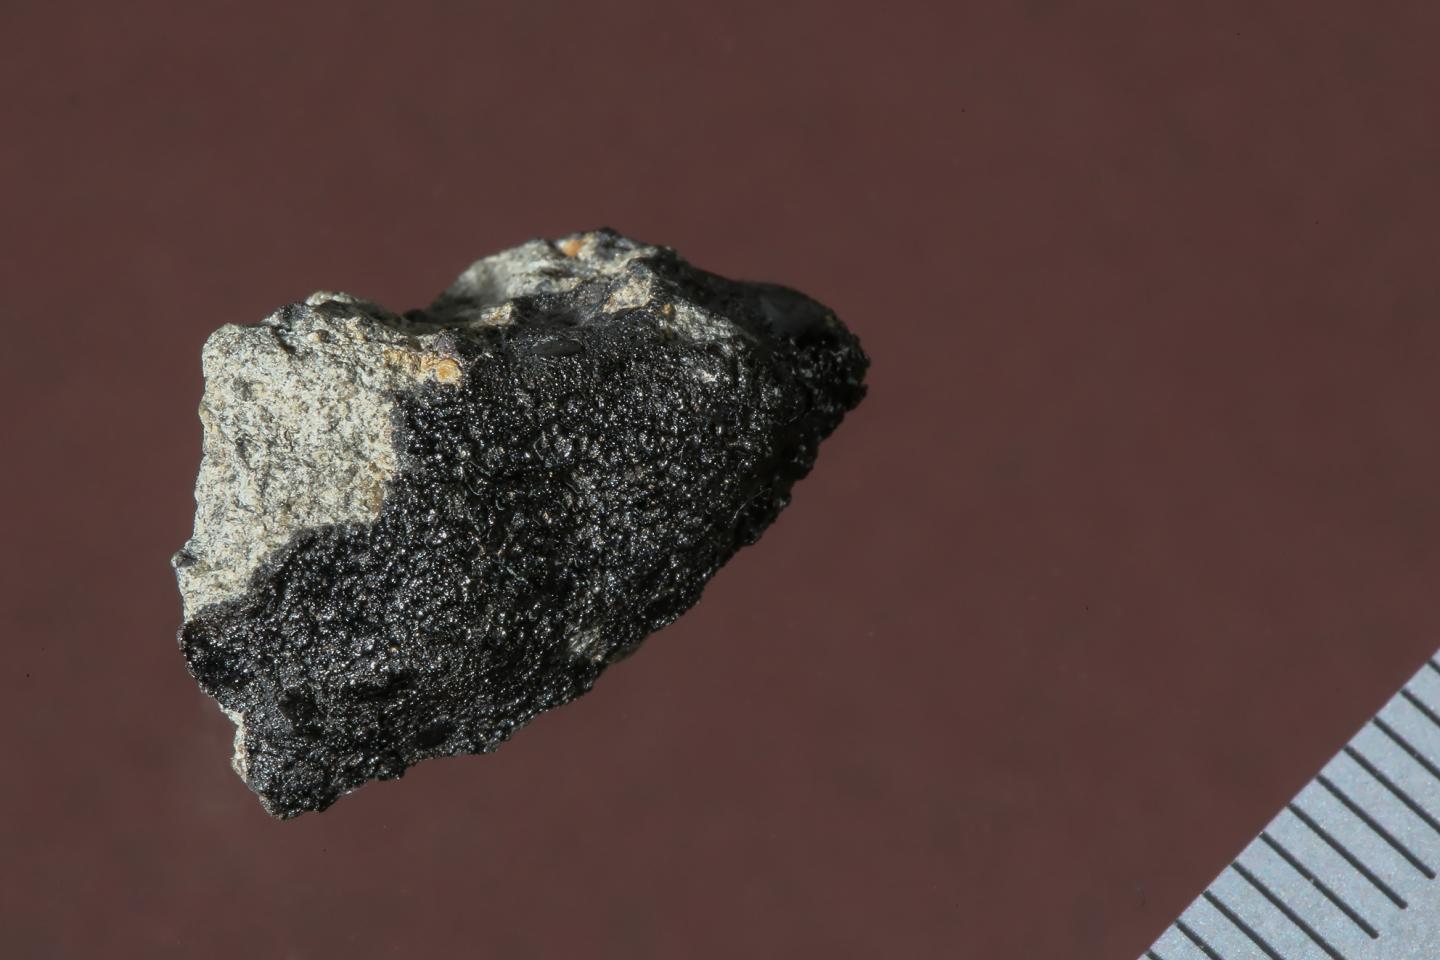 Close-up of the Tissint Meteorite (1 of 2)